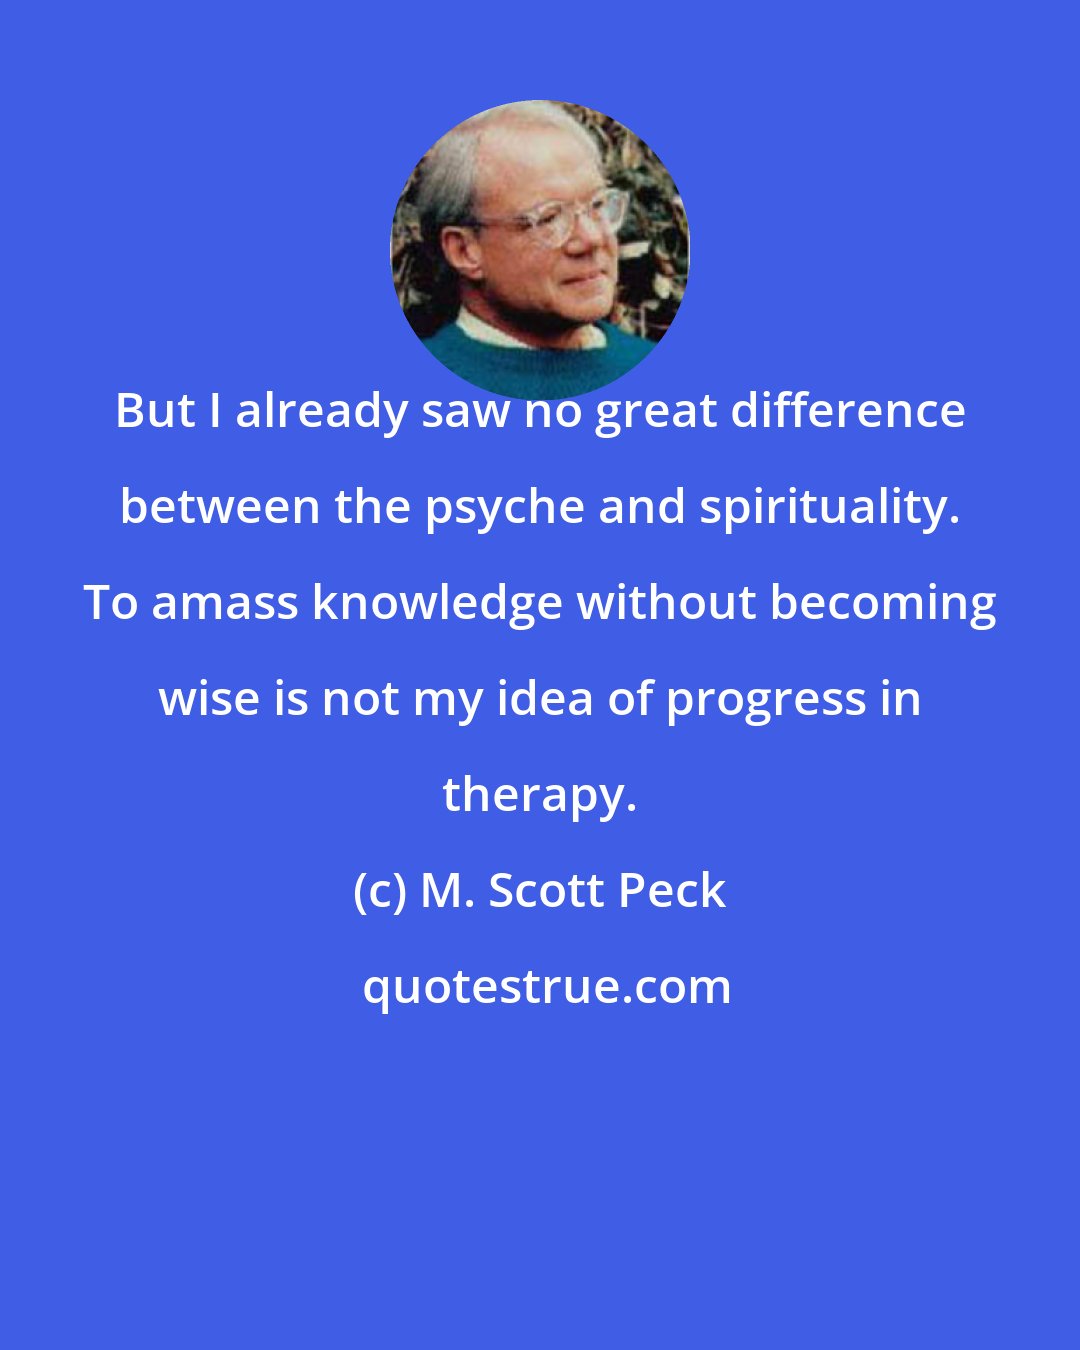 M. Scott Peck: But I already saw no great difference between the psyche and spirituality. To amass knowledge without becoming wise is not my idea of progress in therapy.